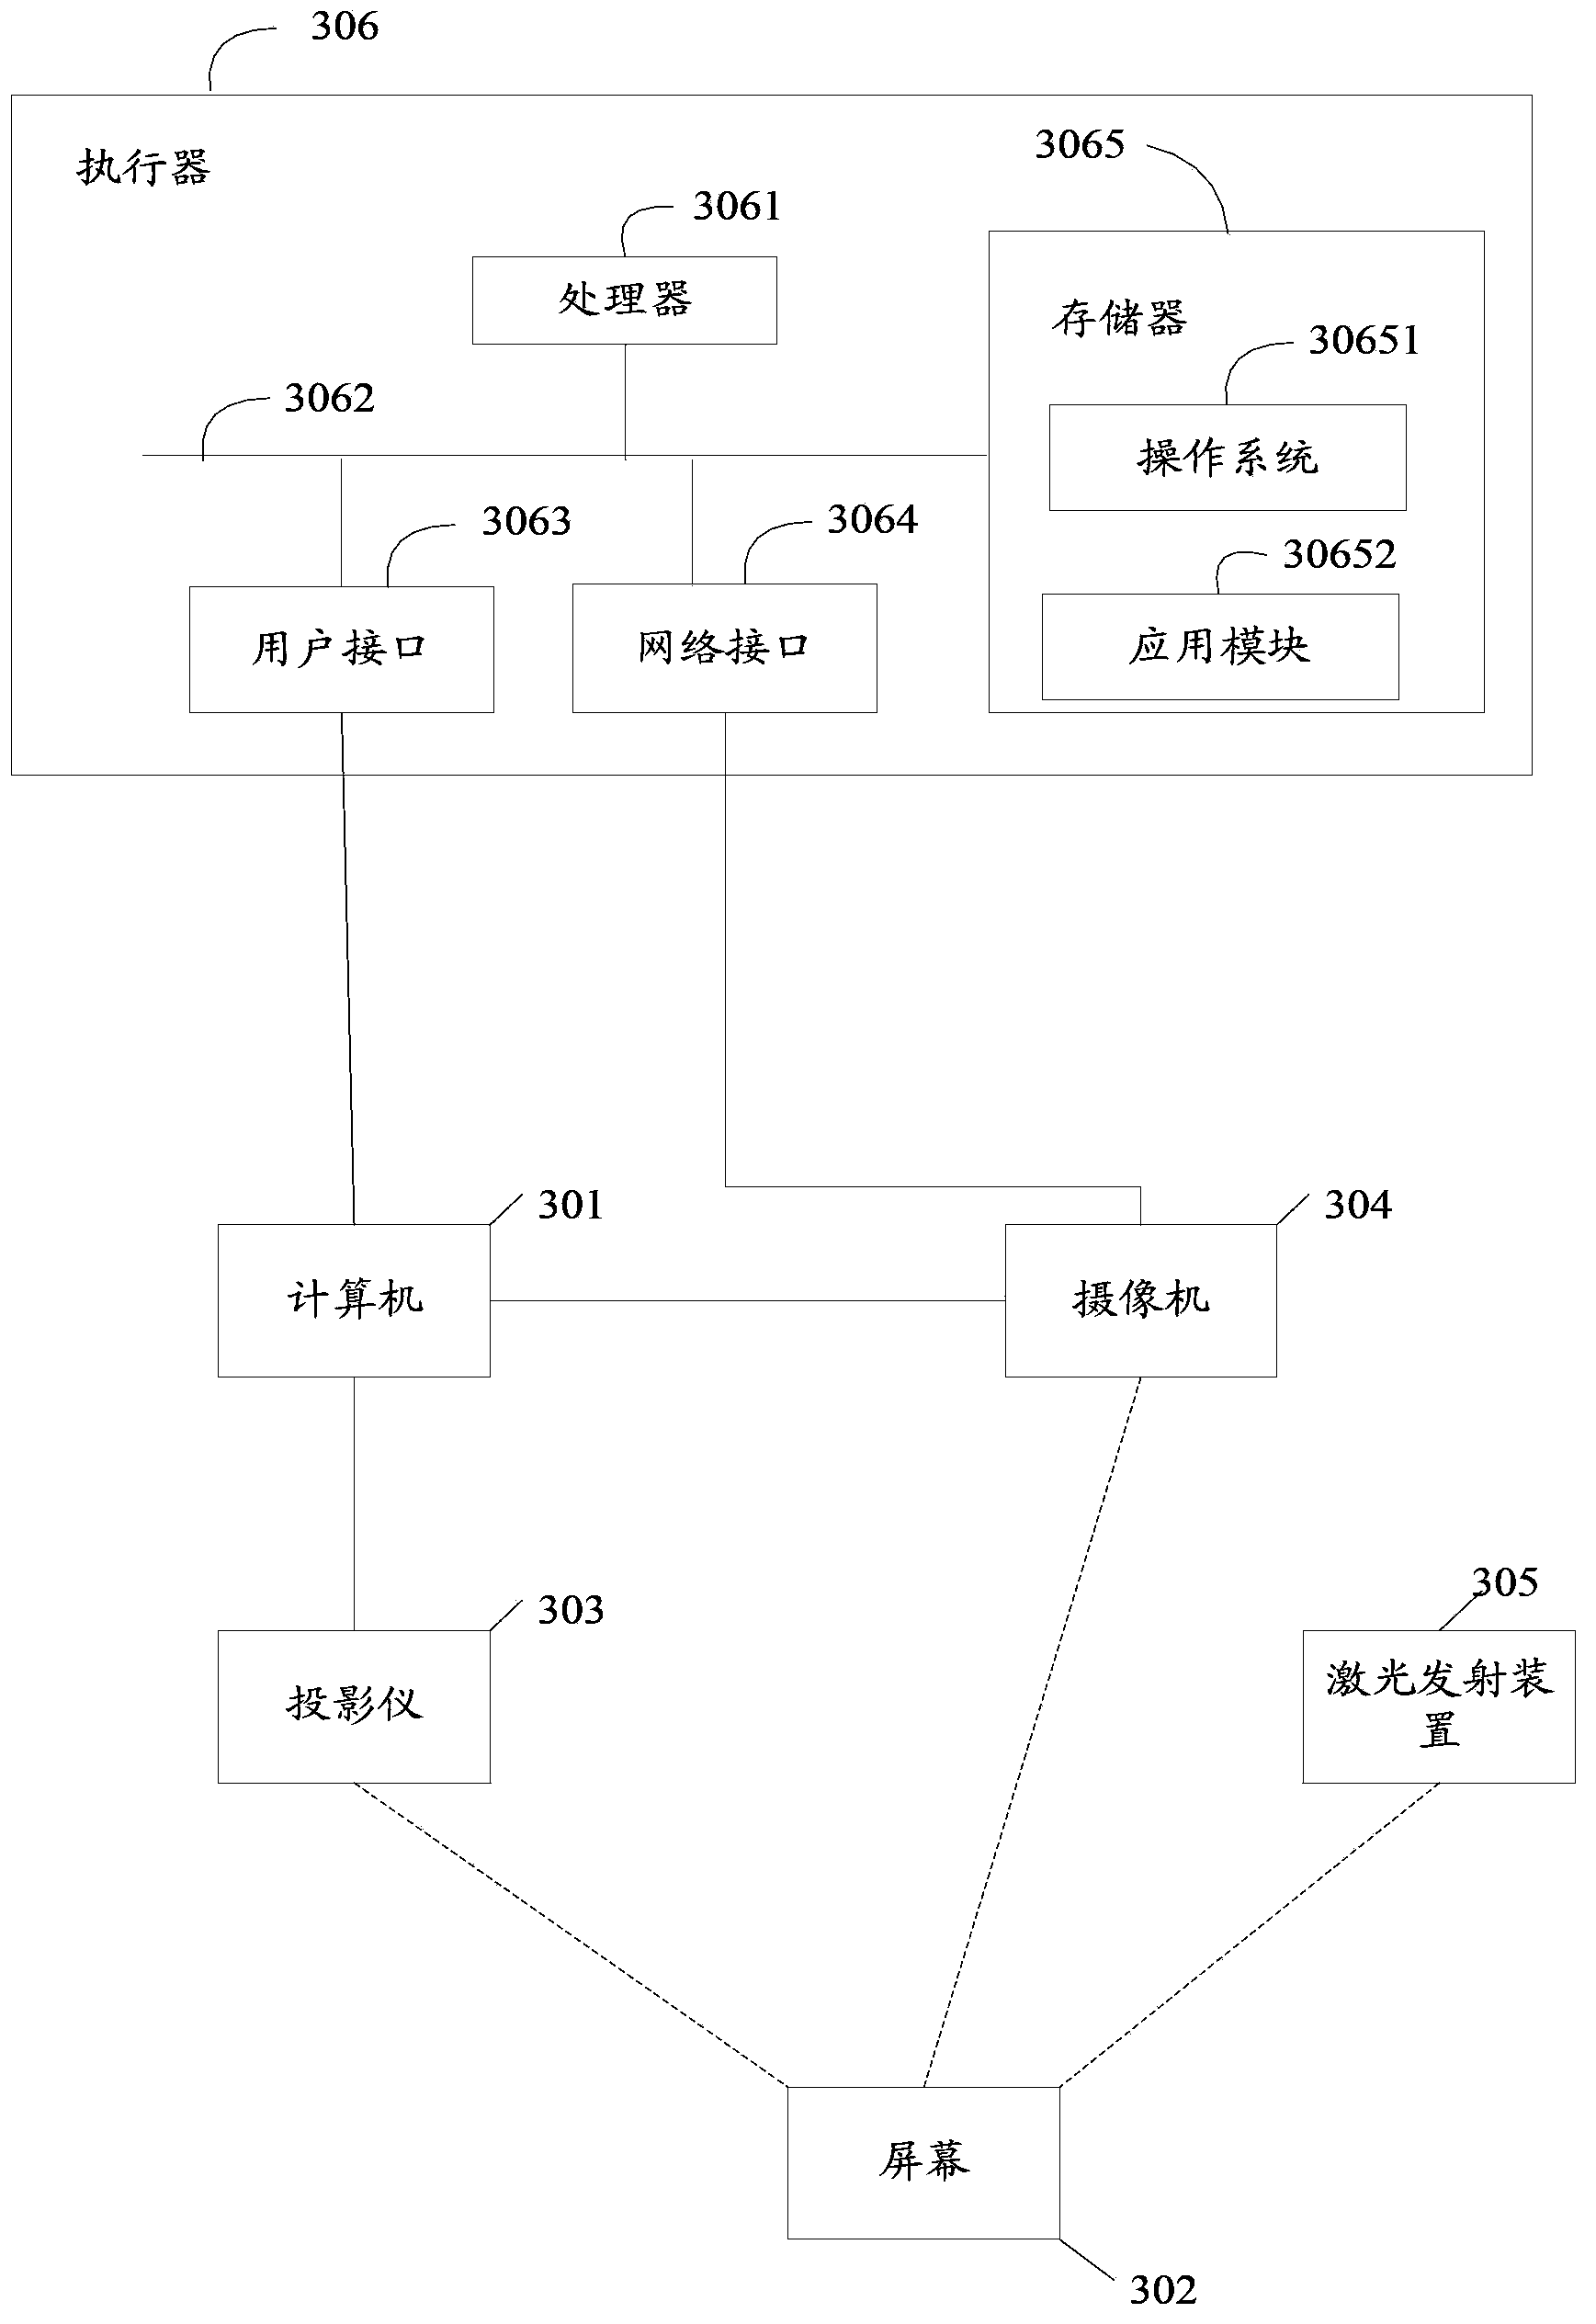 Non-contact screen interaction method and system